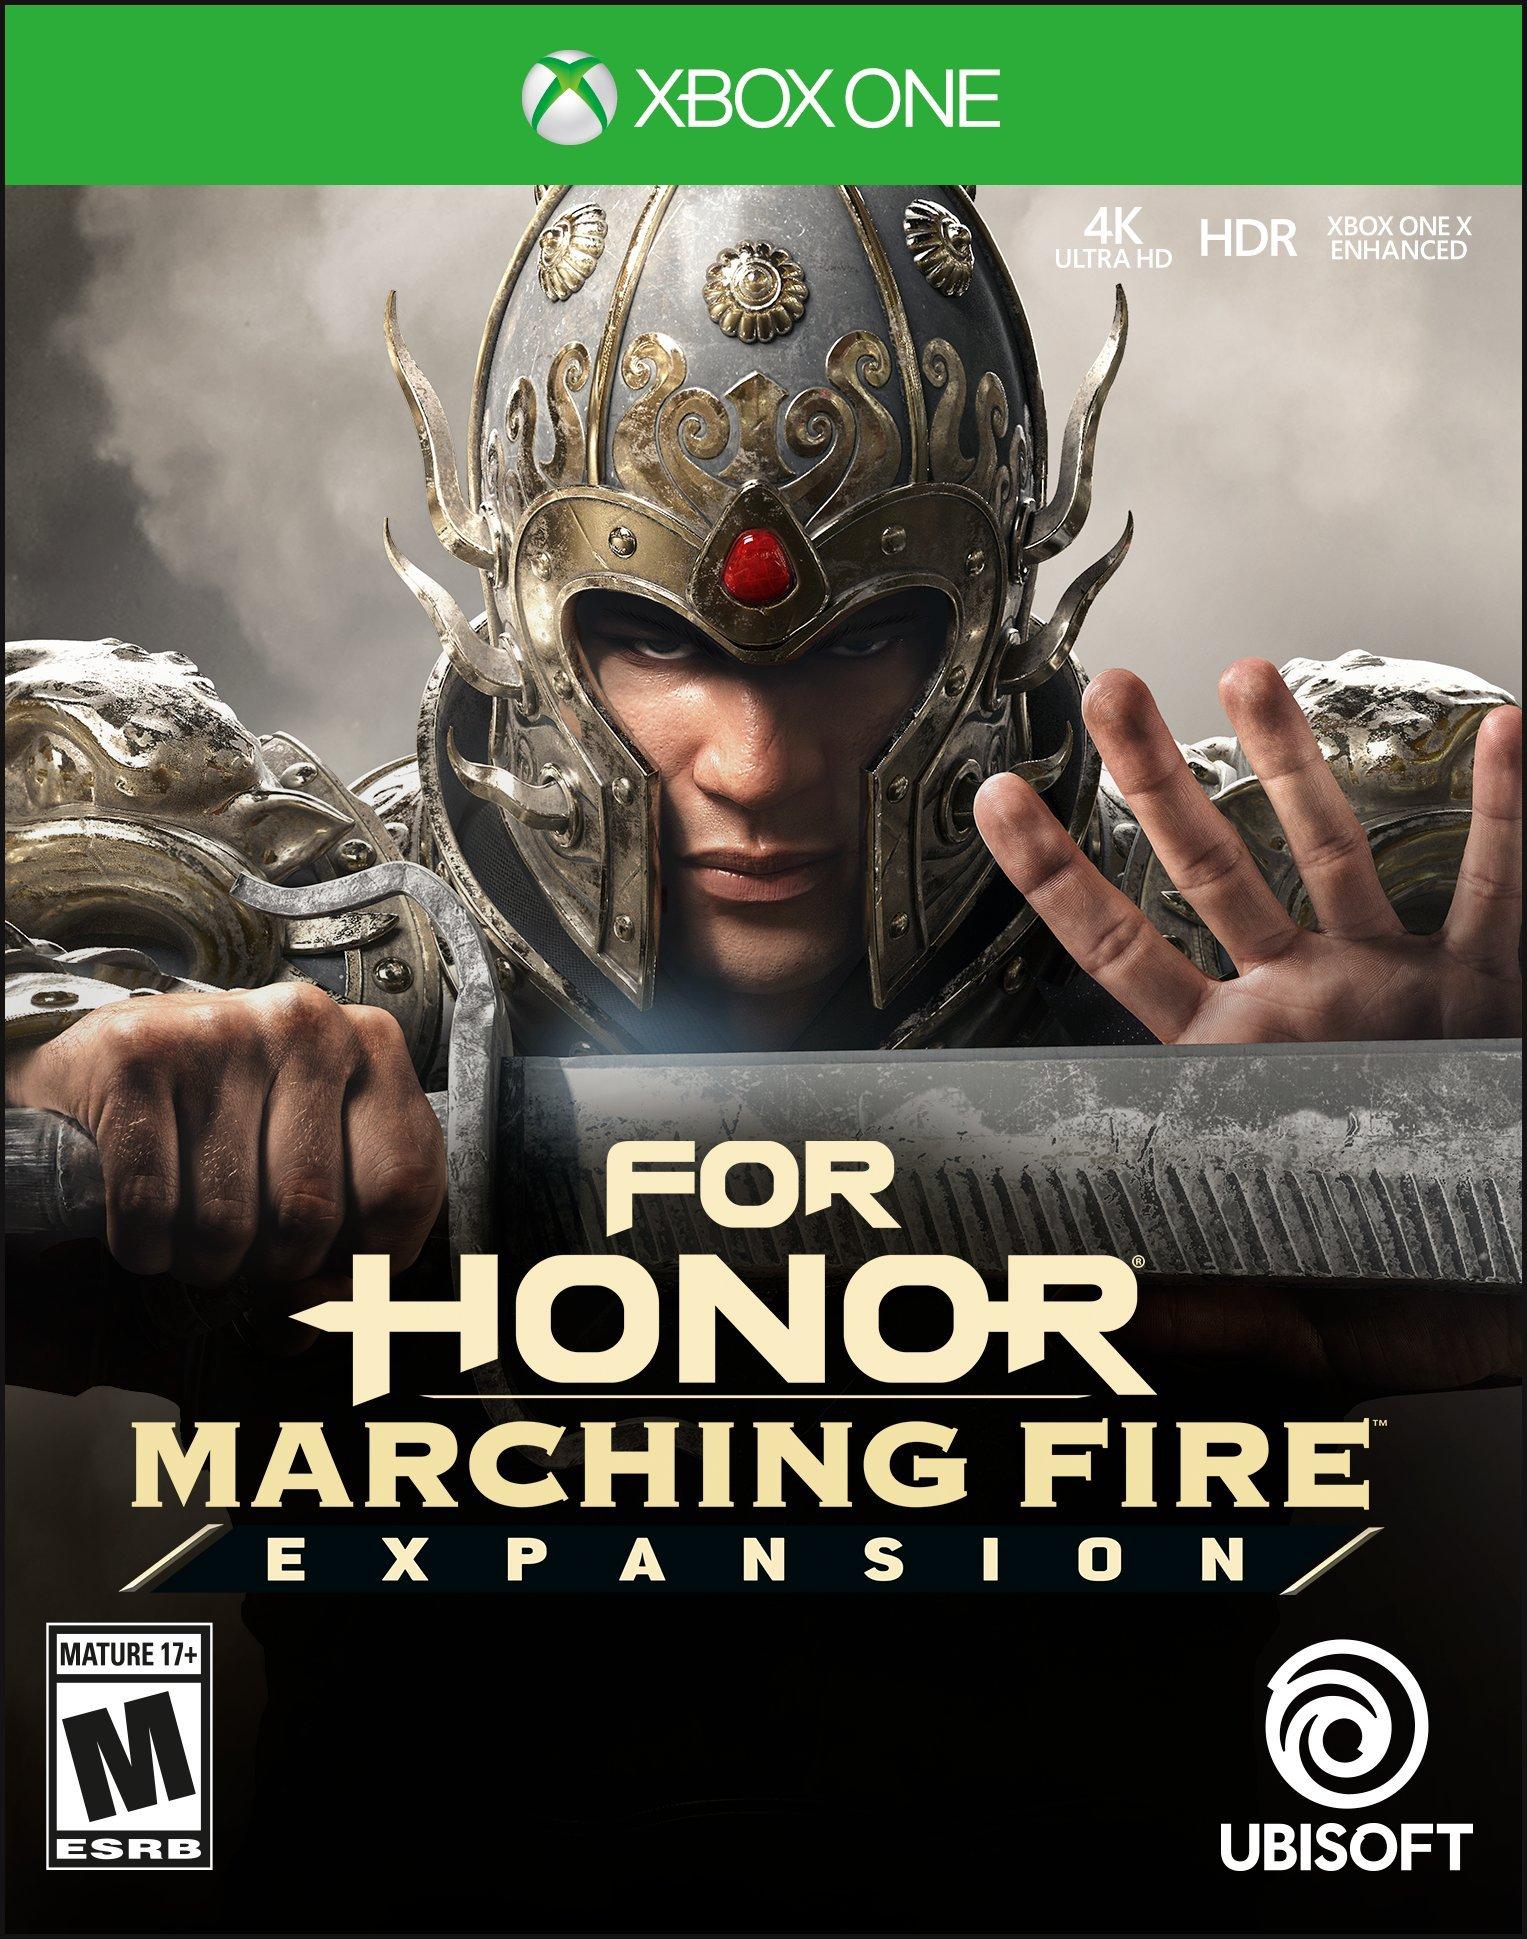 For Honor: Marching Fire Expansion DLC - Xbox One